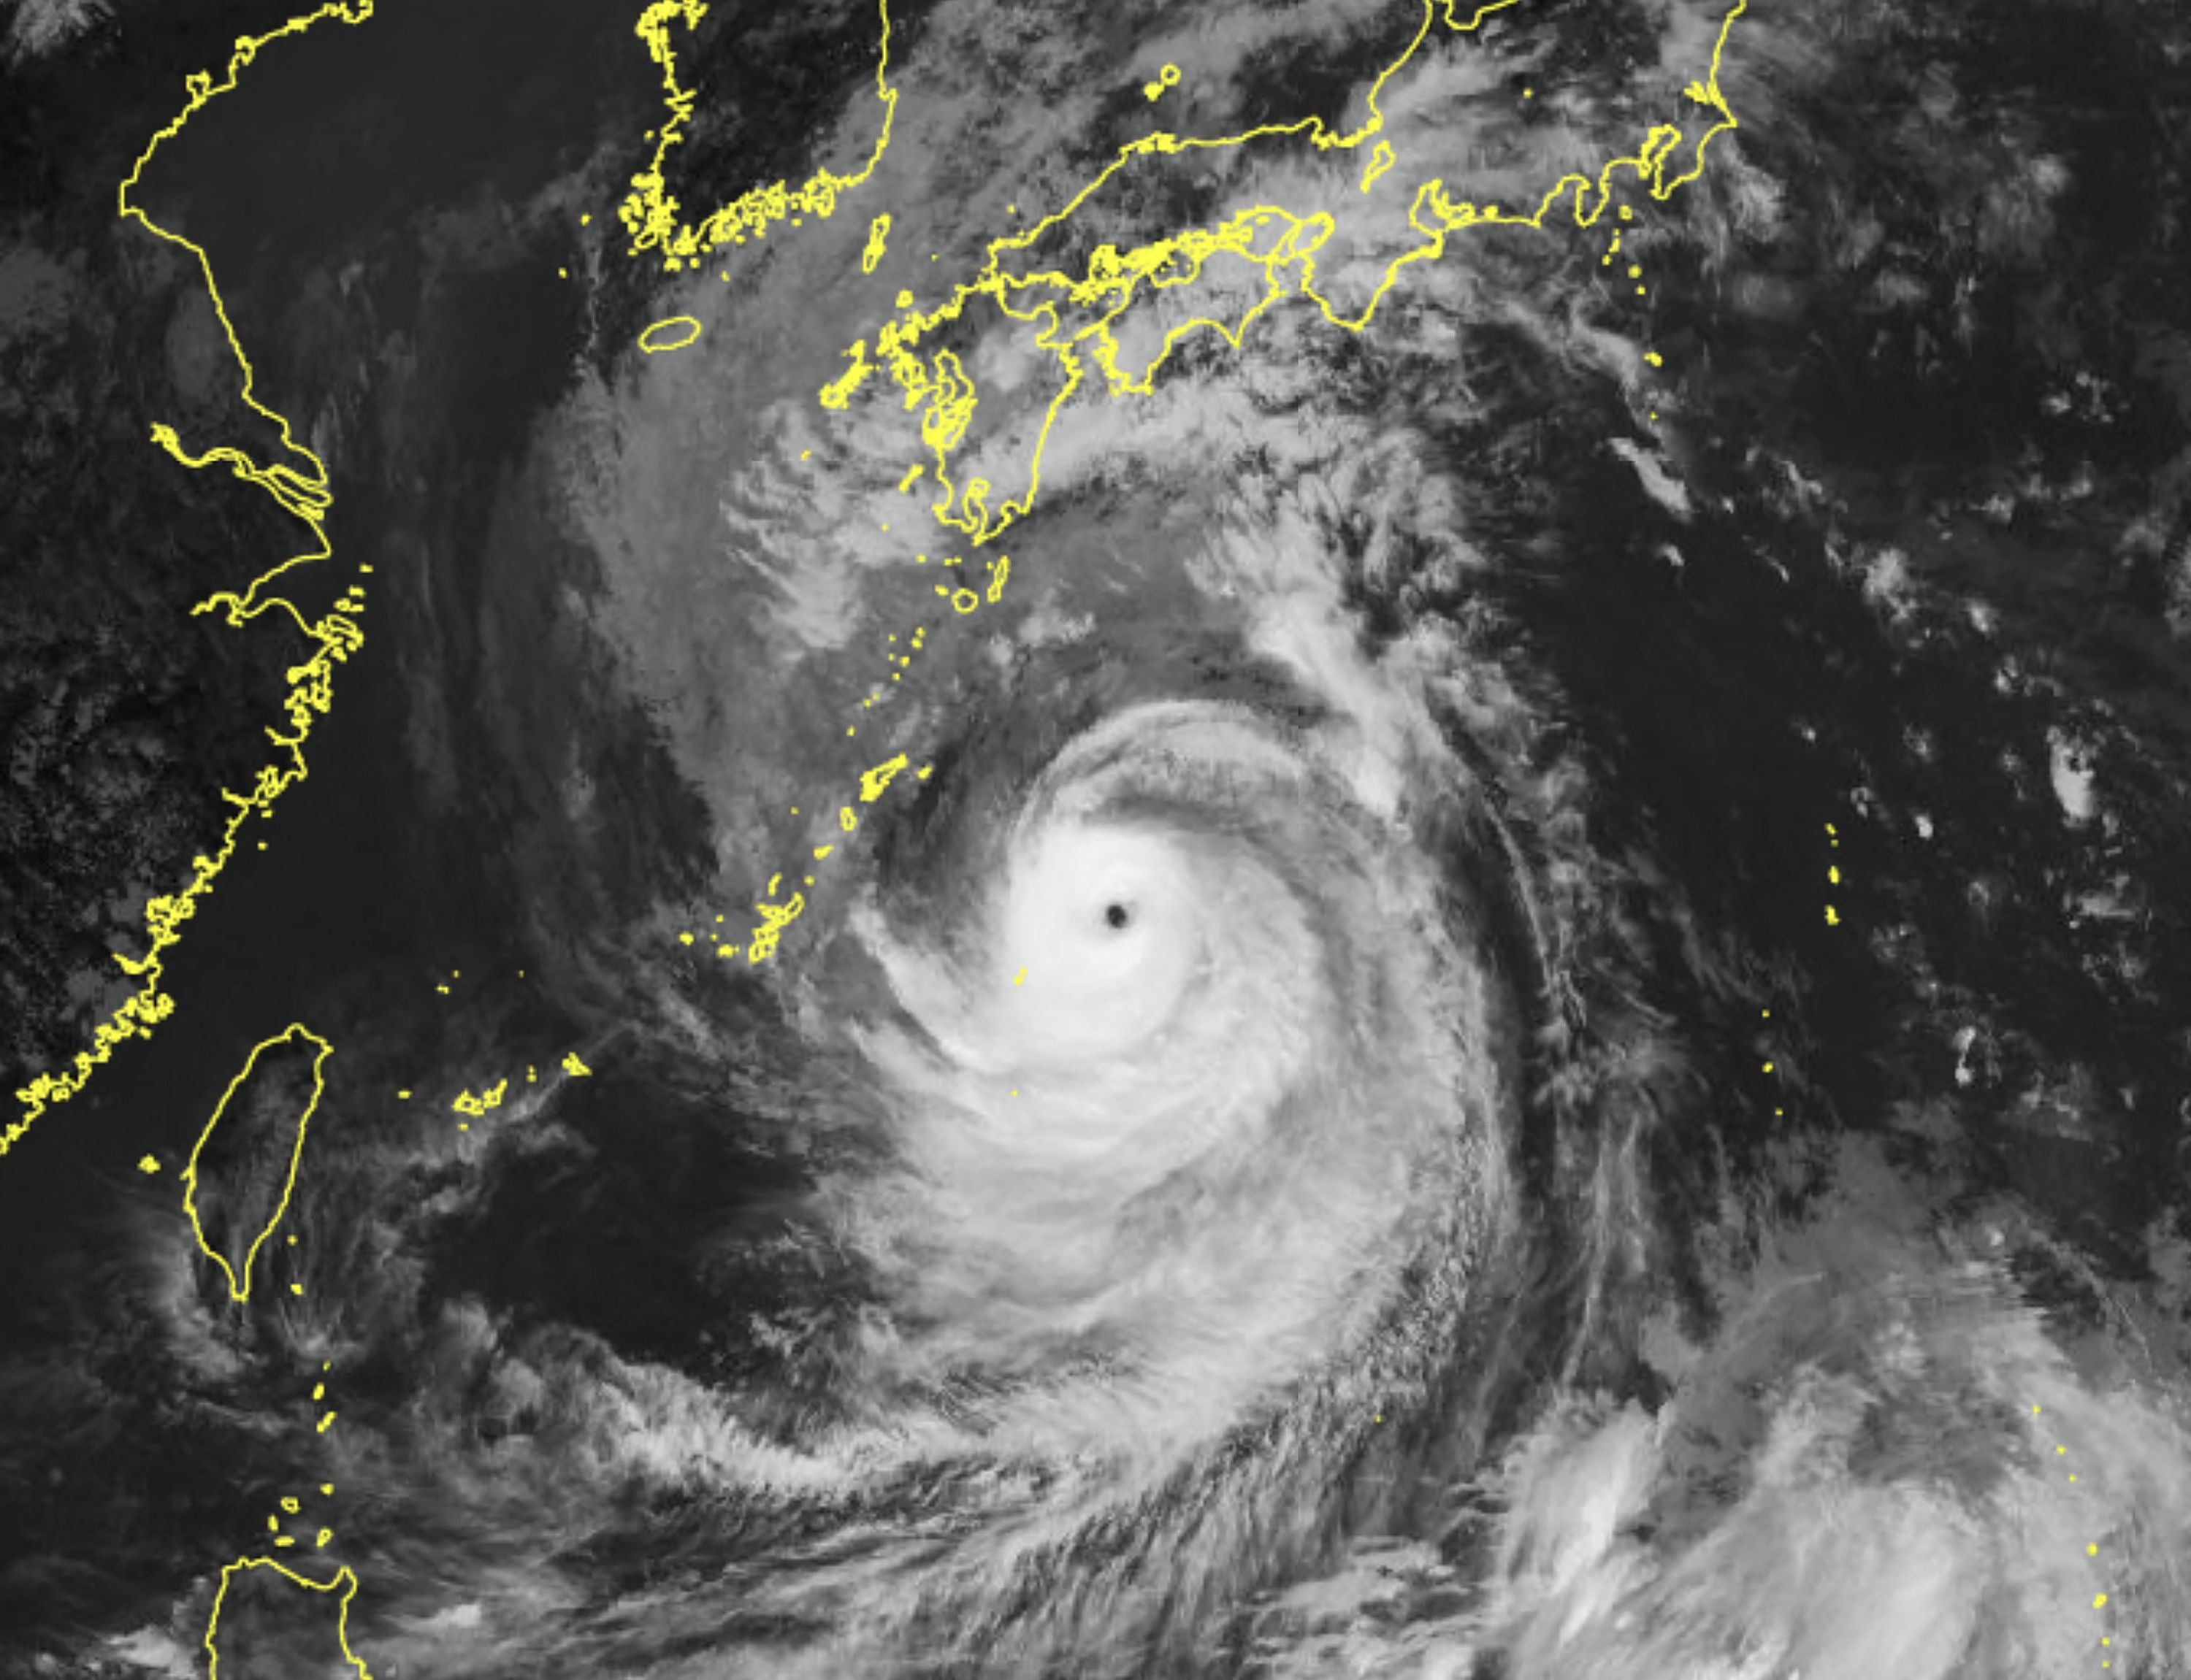 Satellite imagery by the Japan Meteorological Agency shows Typhoon Nanmadol building up near the remote southern islands of Japan